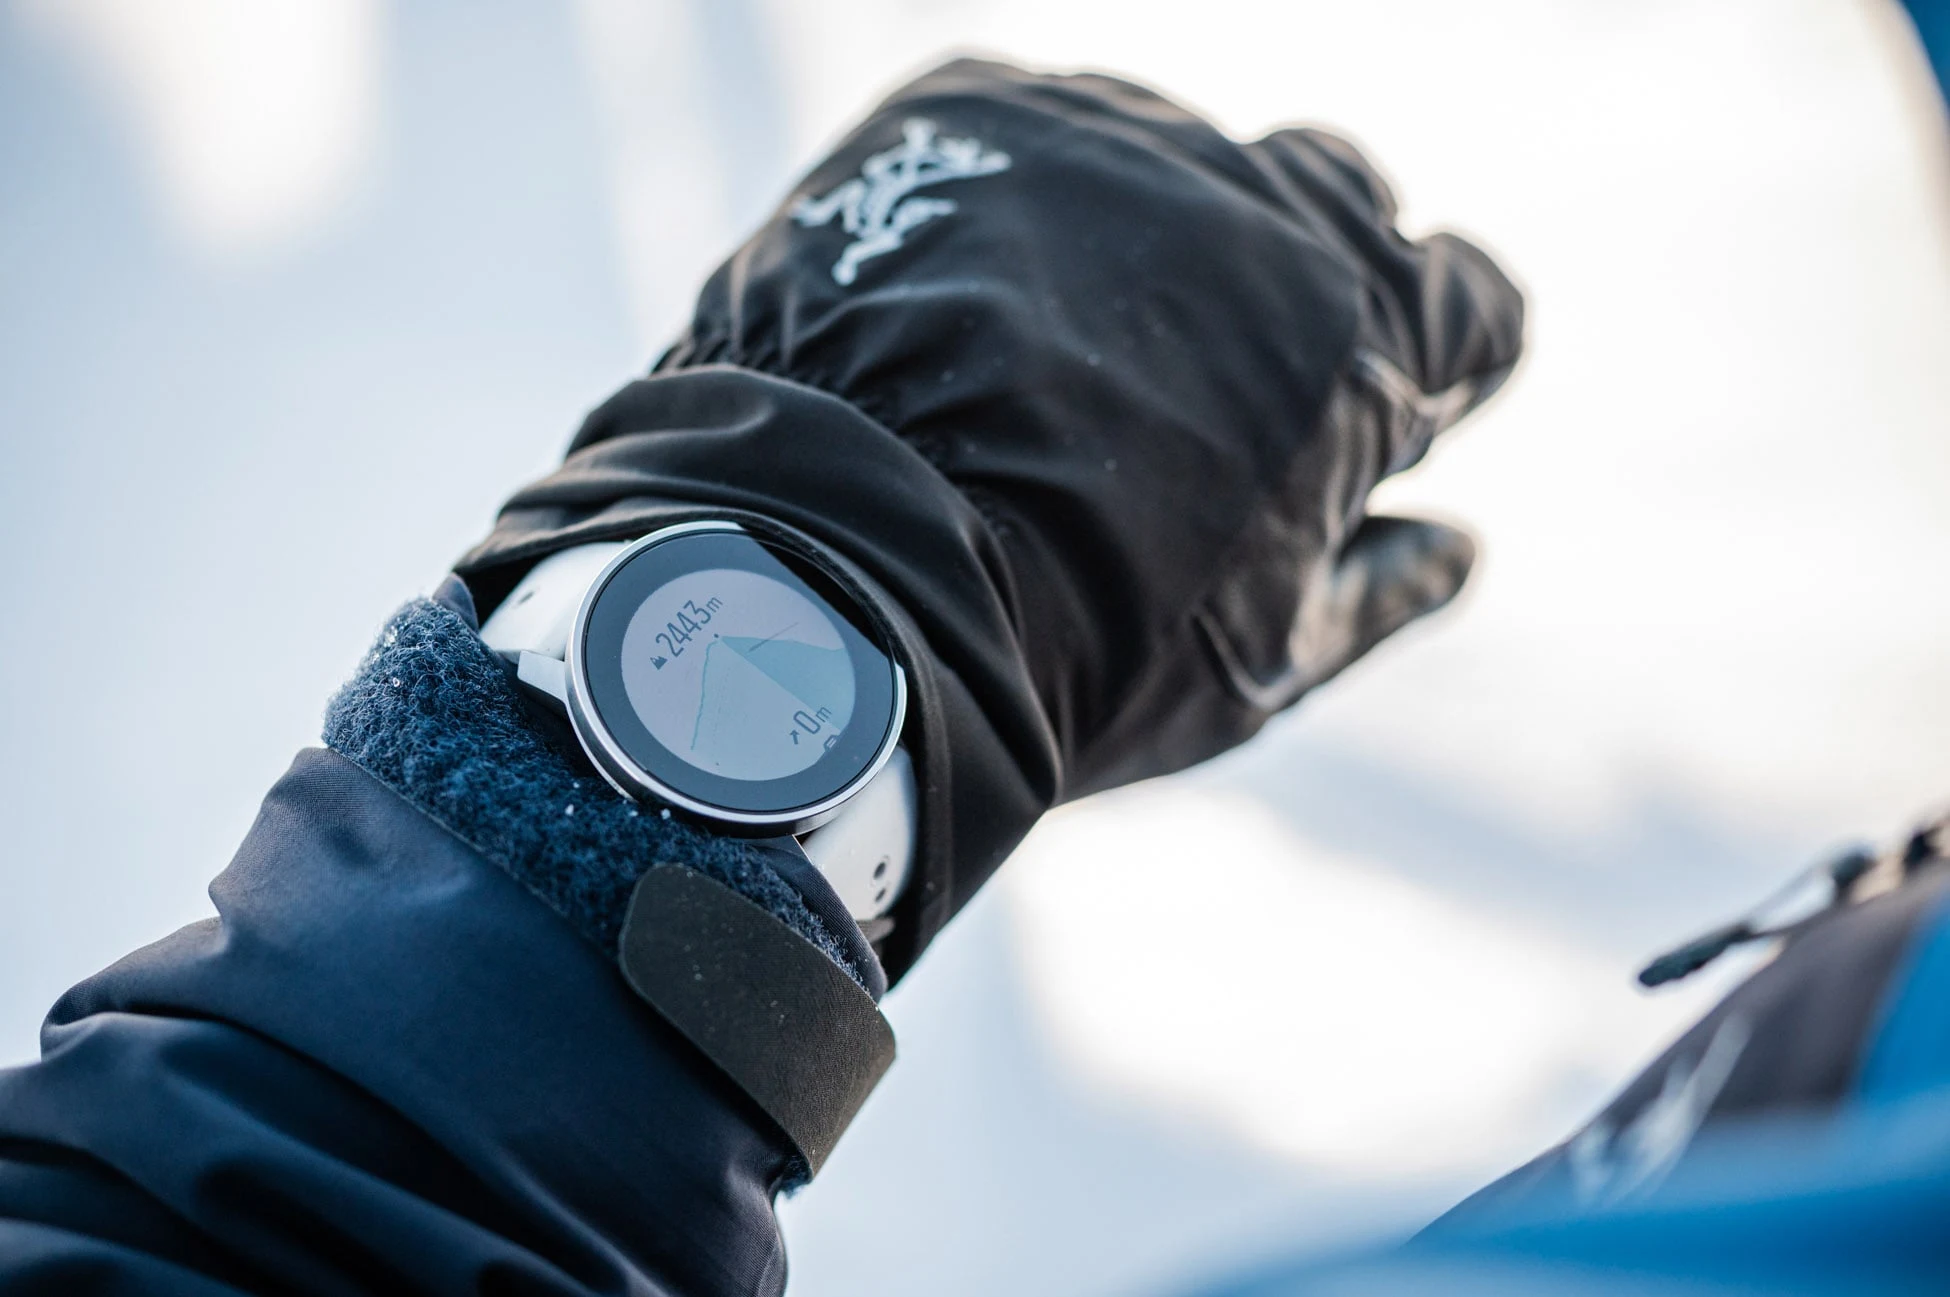 How is Suunto Vertical revolutionising the technology of sports watches?